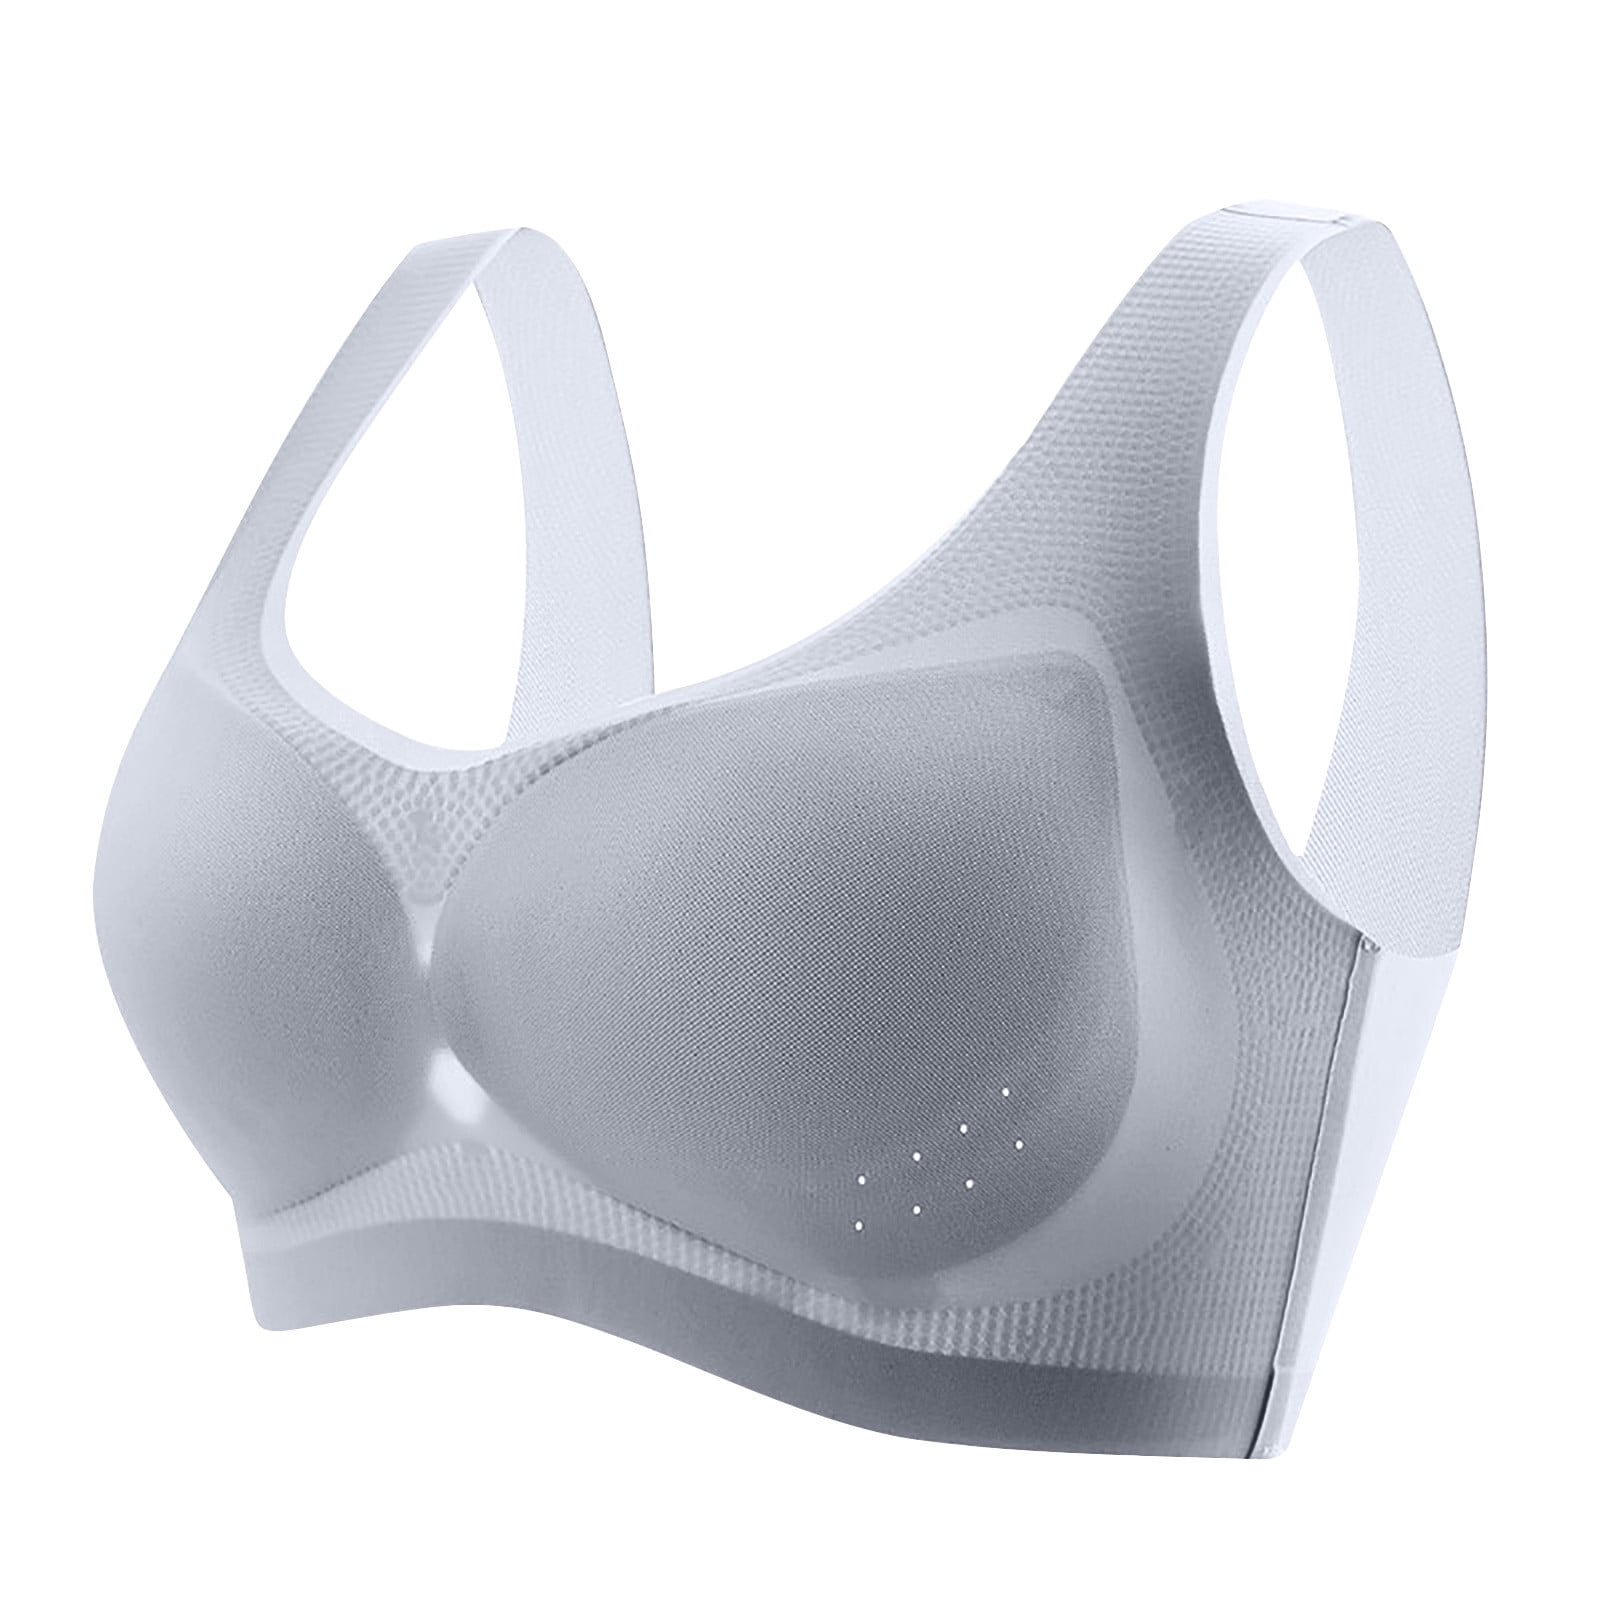 Stick On Bra, Sticky Bra, Adhesive Bra, Invisible Bra, Breast Lifters for  Women with Push Up Effects